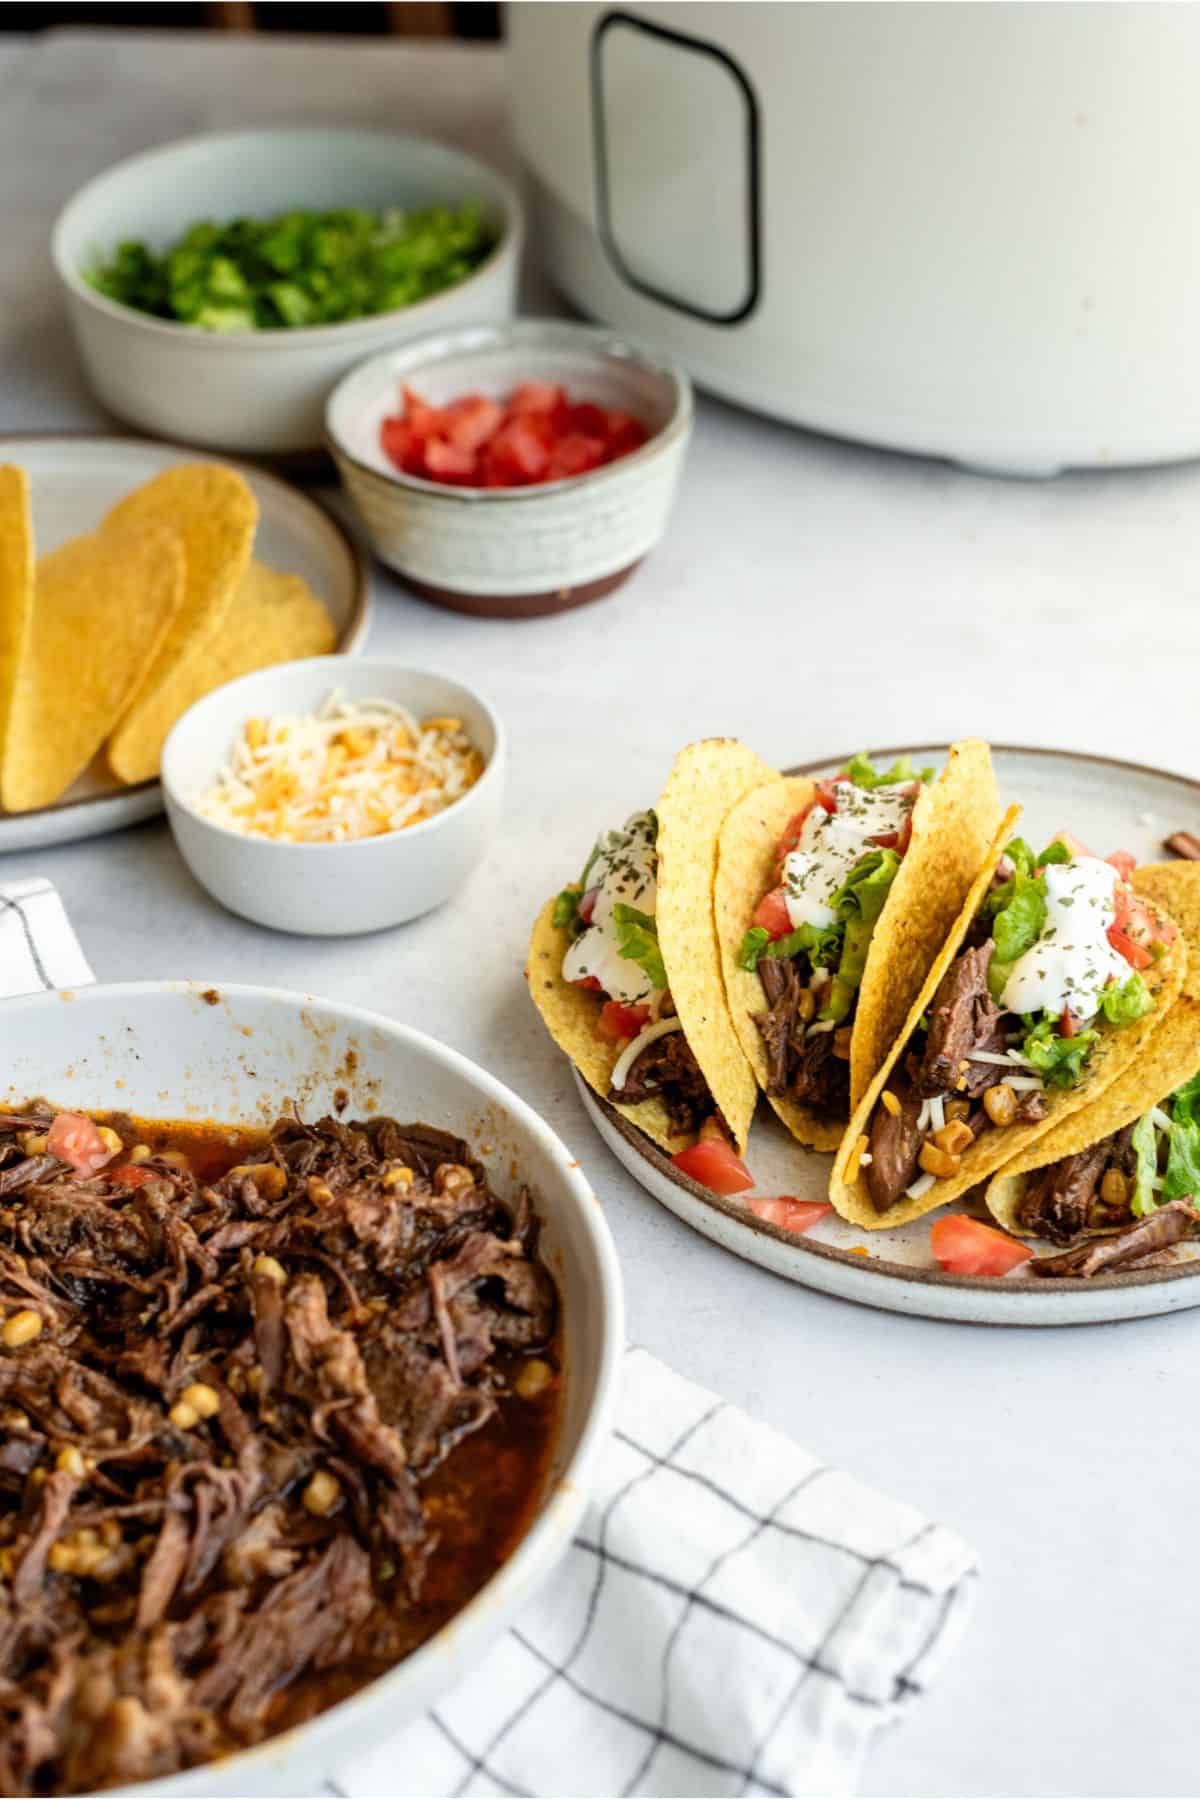 A plate of Slow Cooker Shredded Beef Tacos and ingredients needed to make Slow Cooker Shredded Beef Tacos